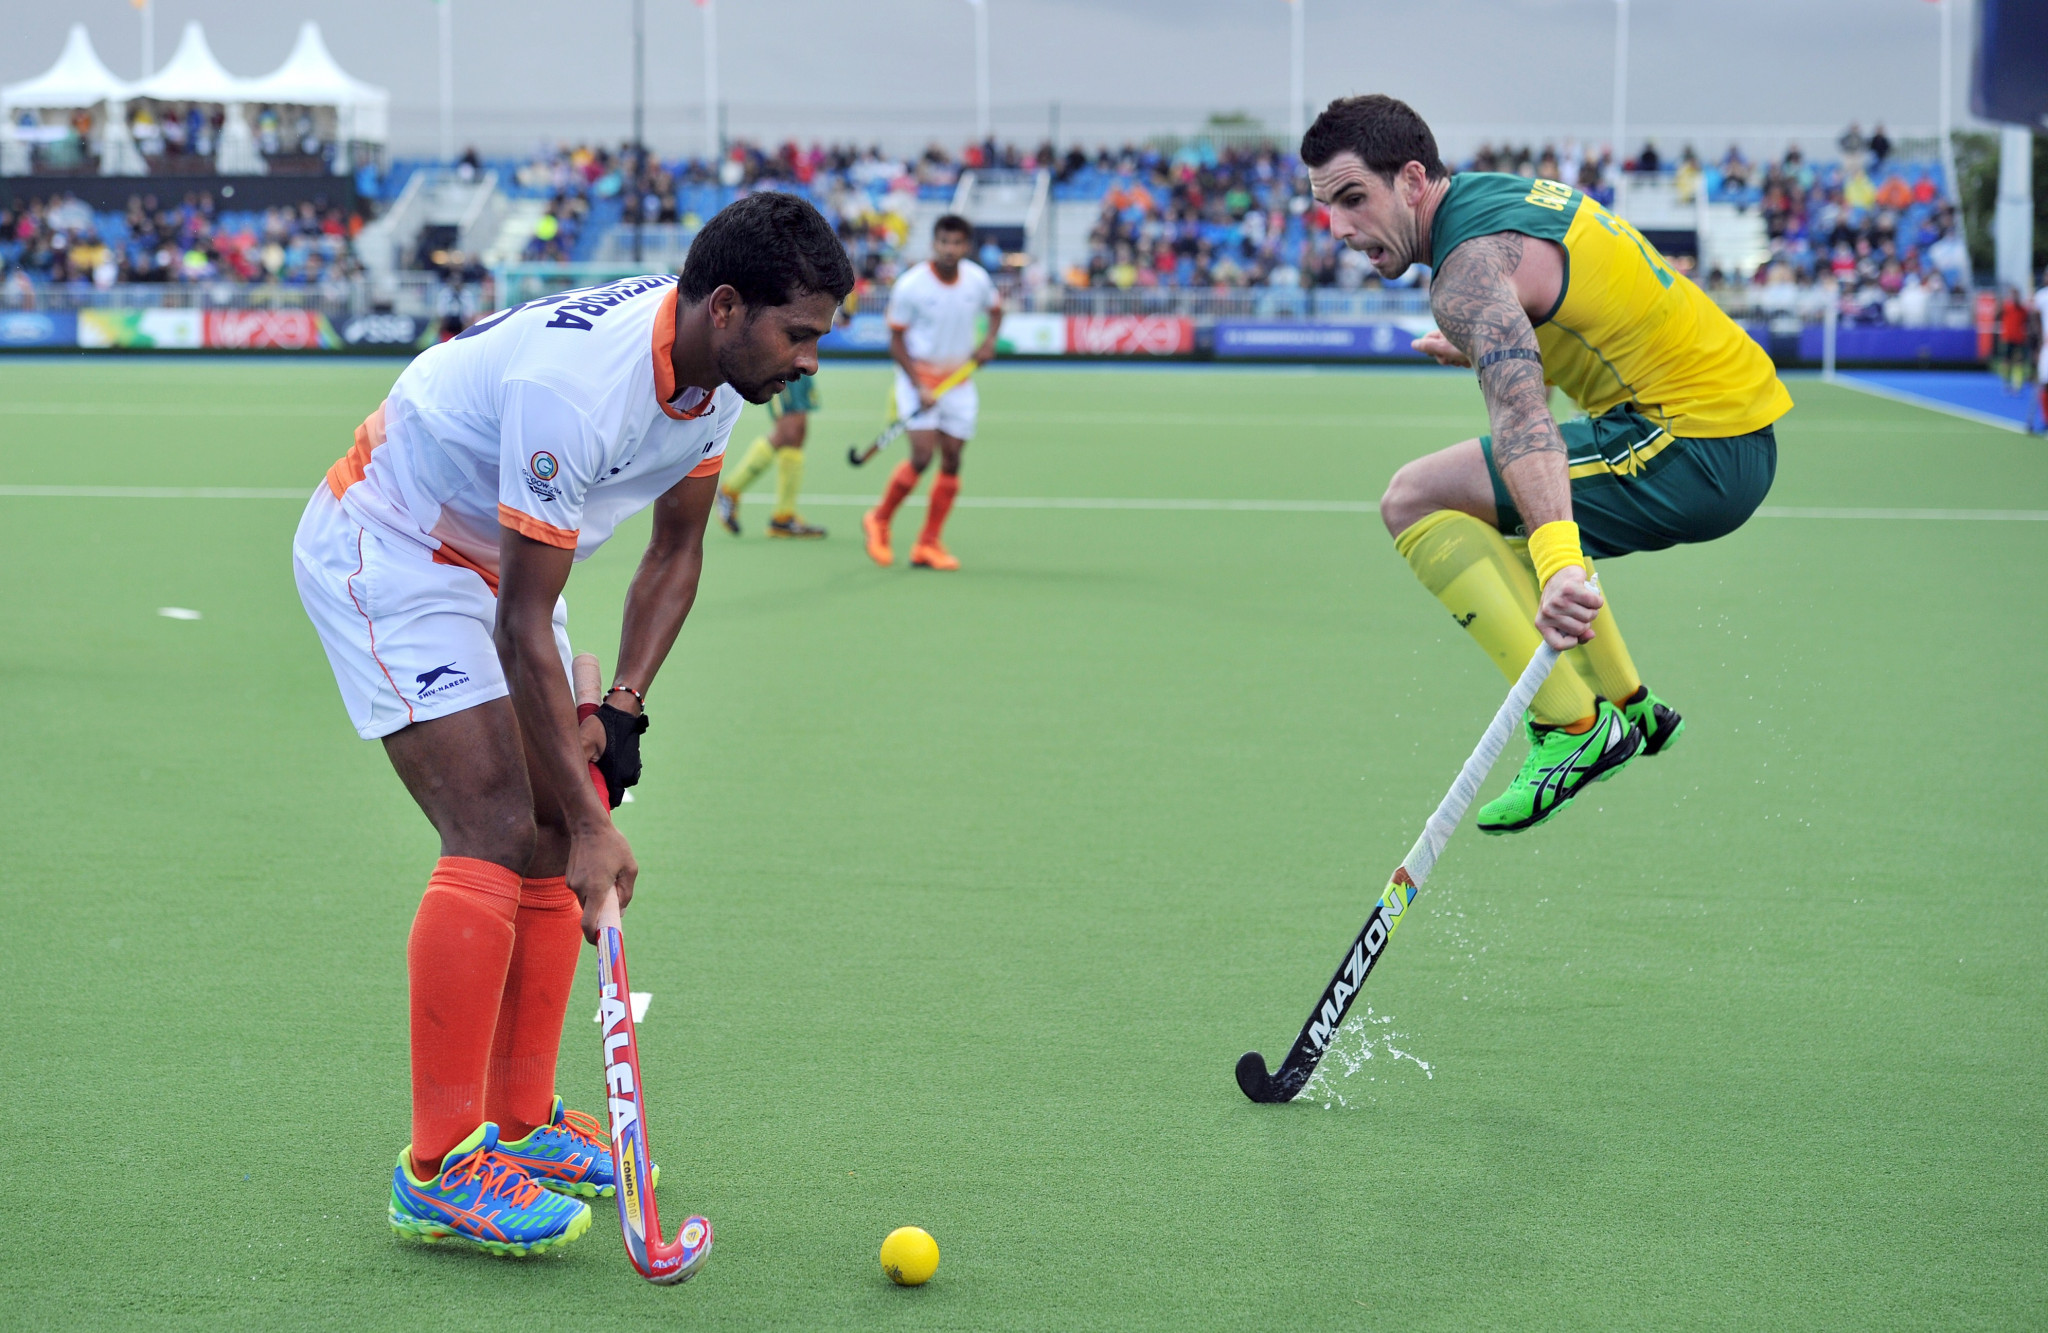 India lost the Glasgow 2014 men's hockey final to Australia ©Getty Images